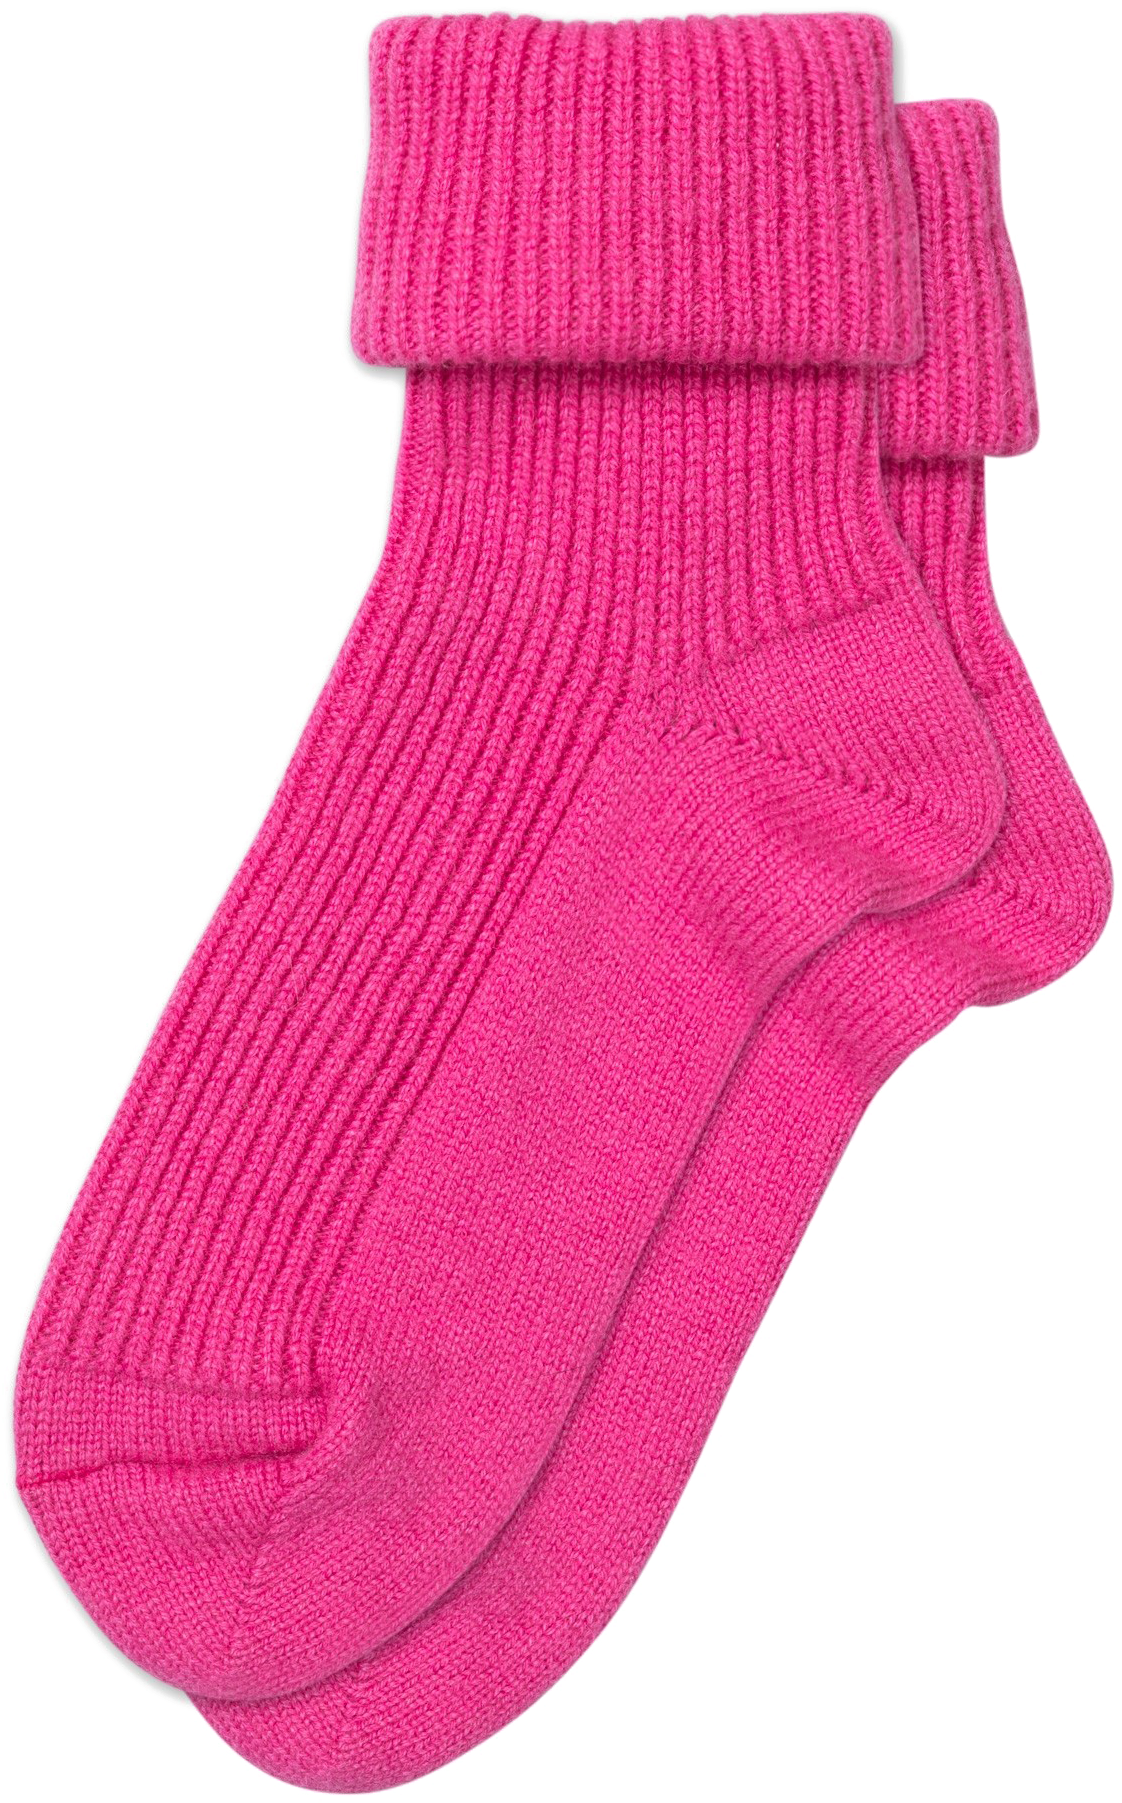 Pink Cuffed Sock Isolated PNG image